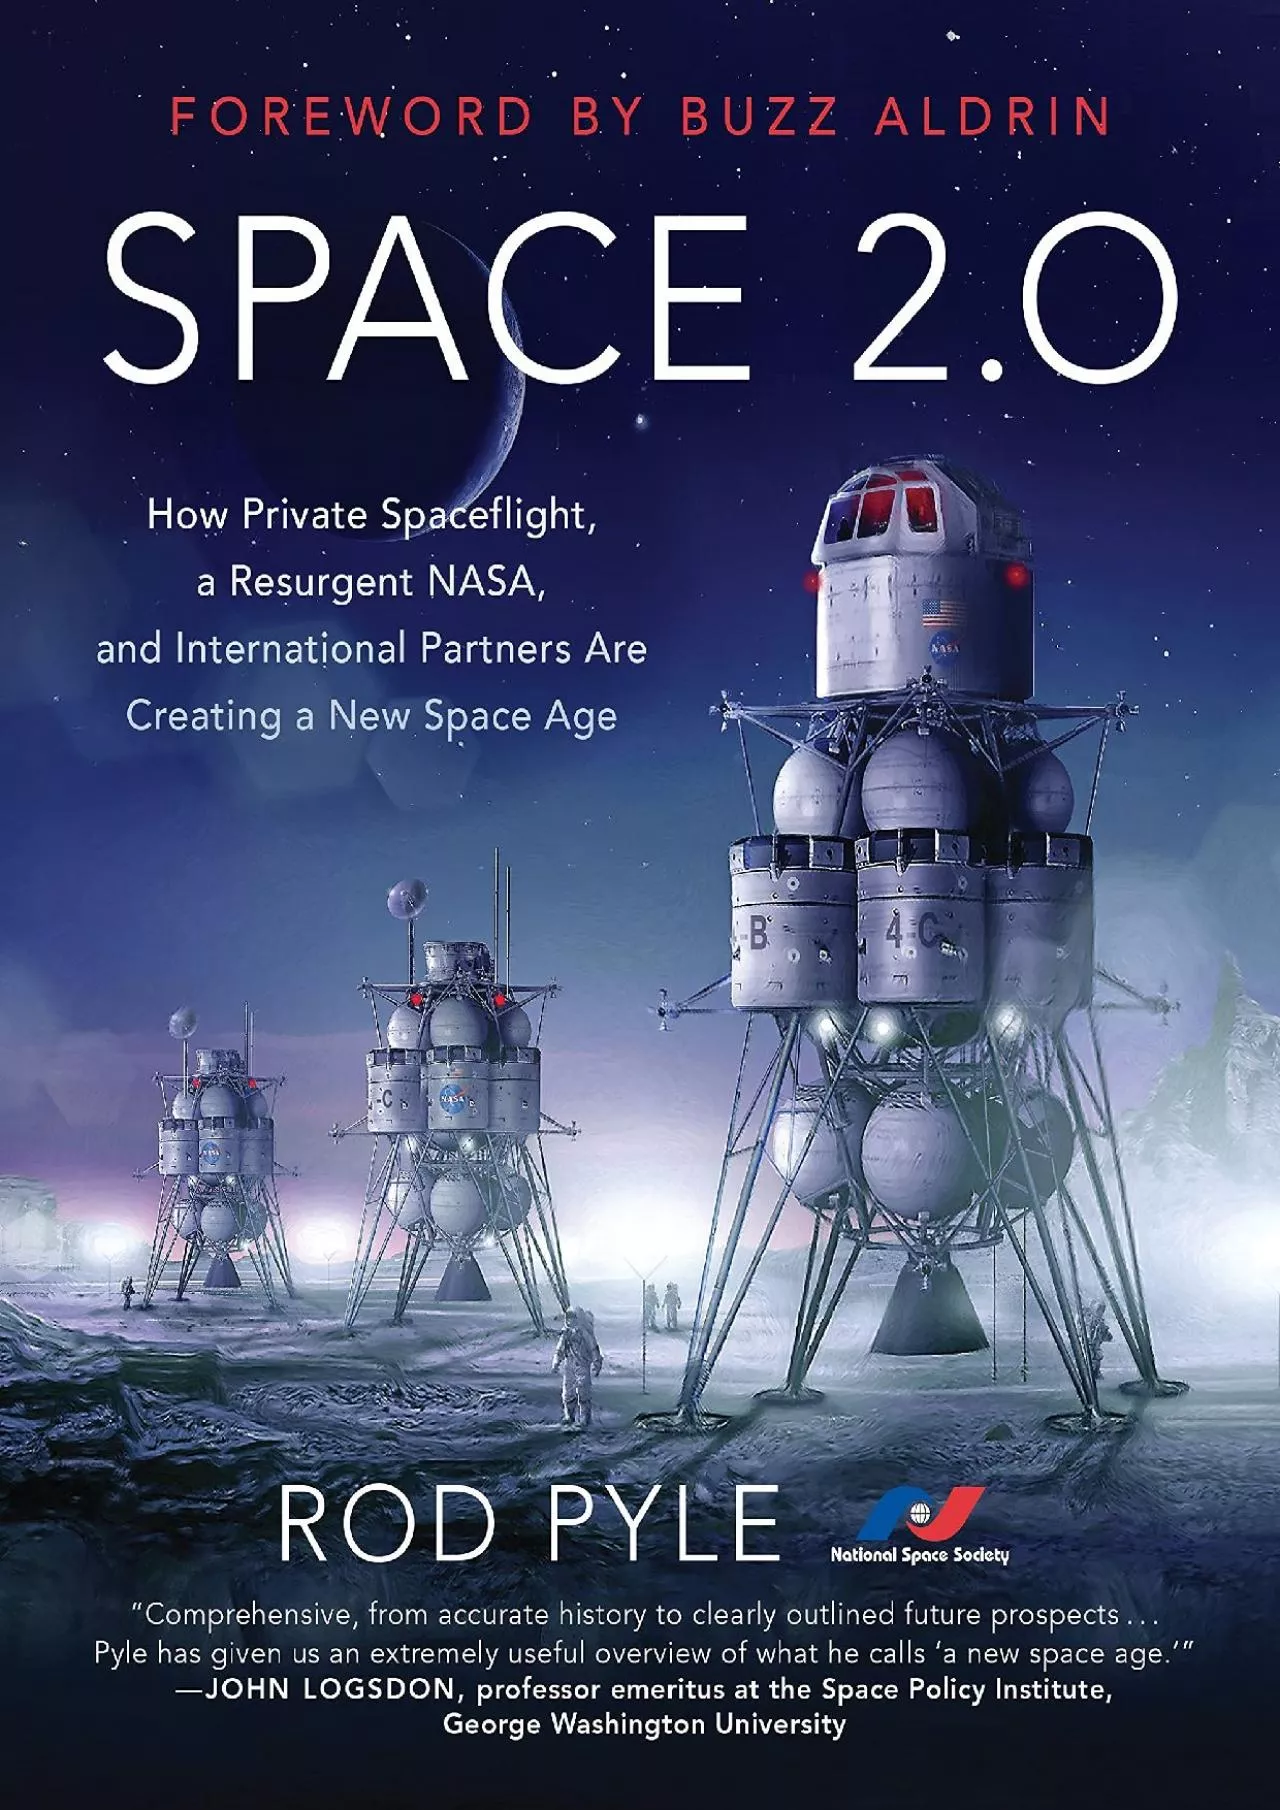 (BOOK)-Space 2.0: How Private Spaceflight, a Resurgent NASA, and International Partners